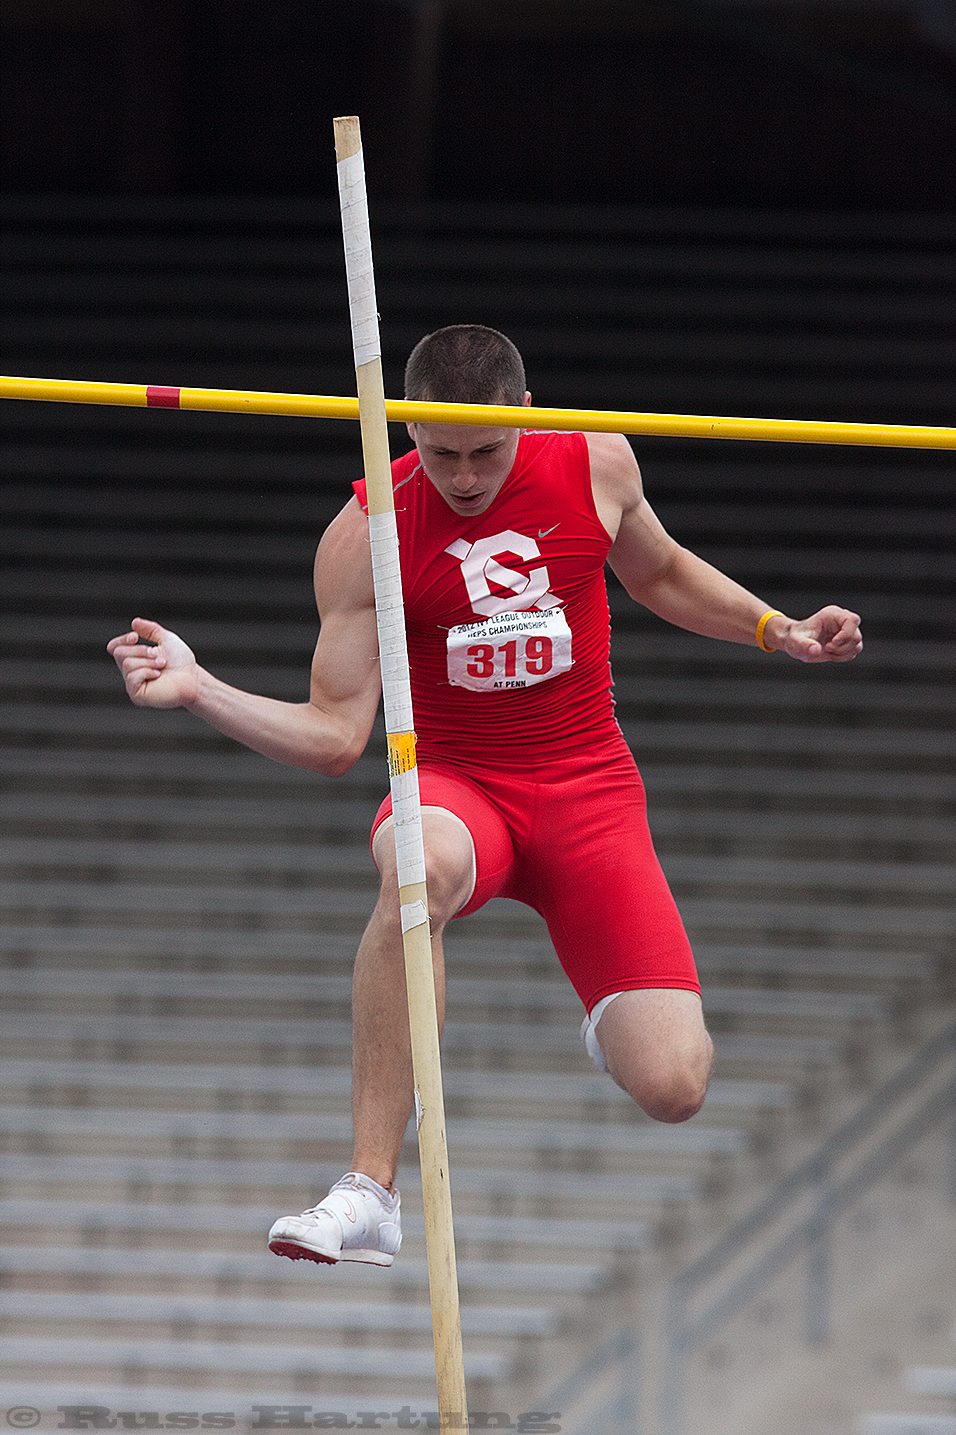 Decathalon Pole Vault event at the 2012 Heptaganol Championships at Penn. 